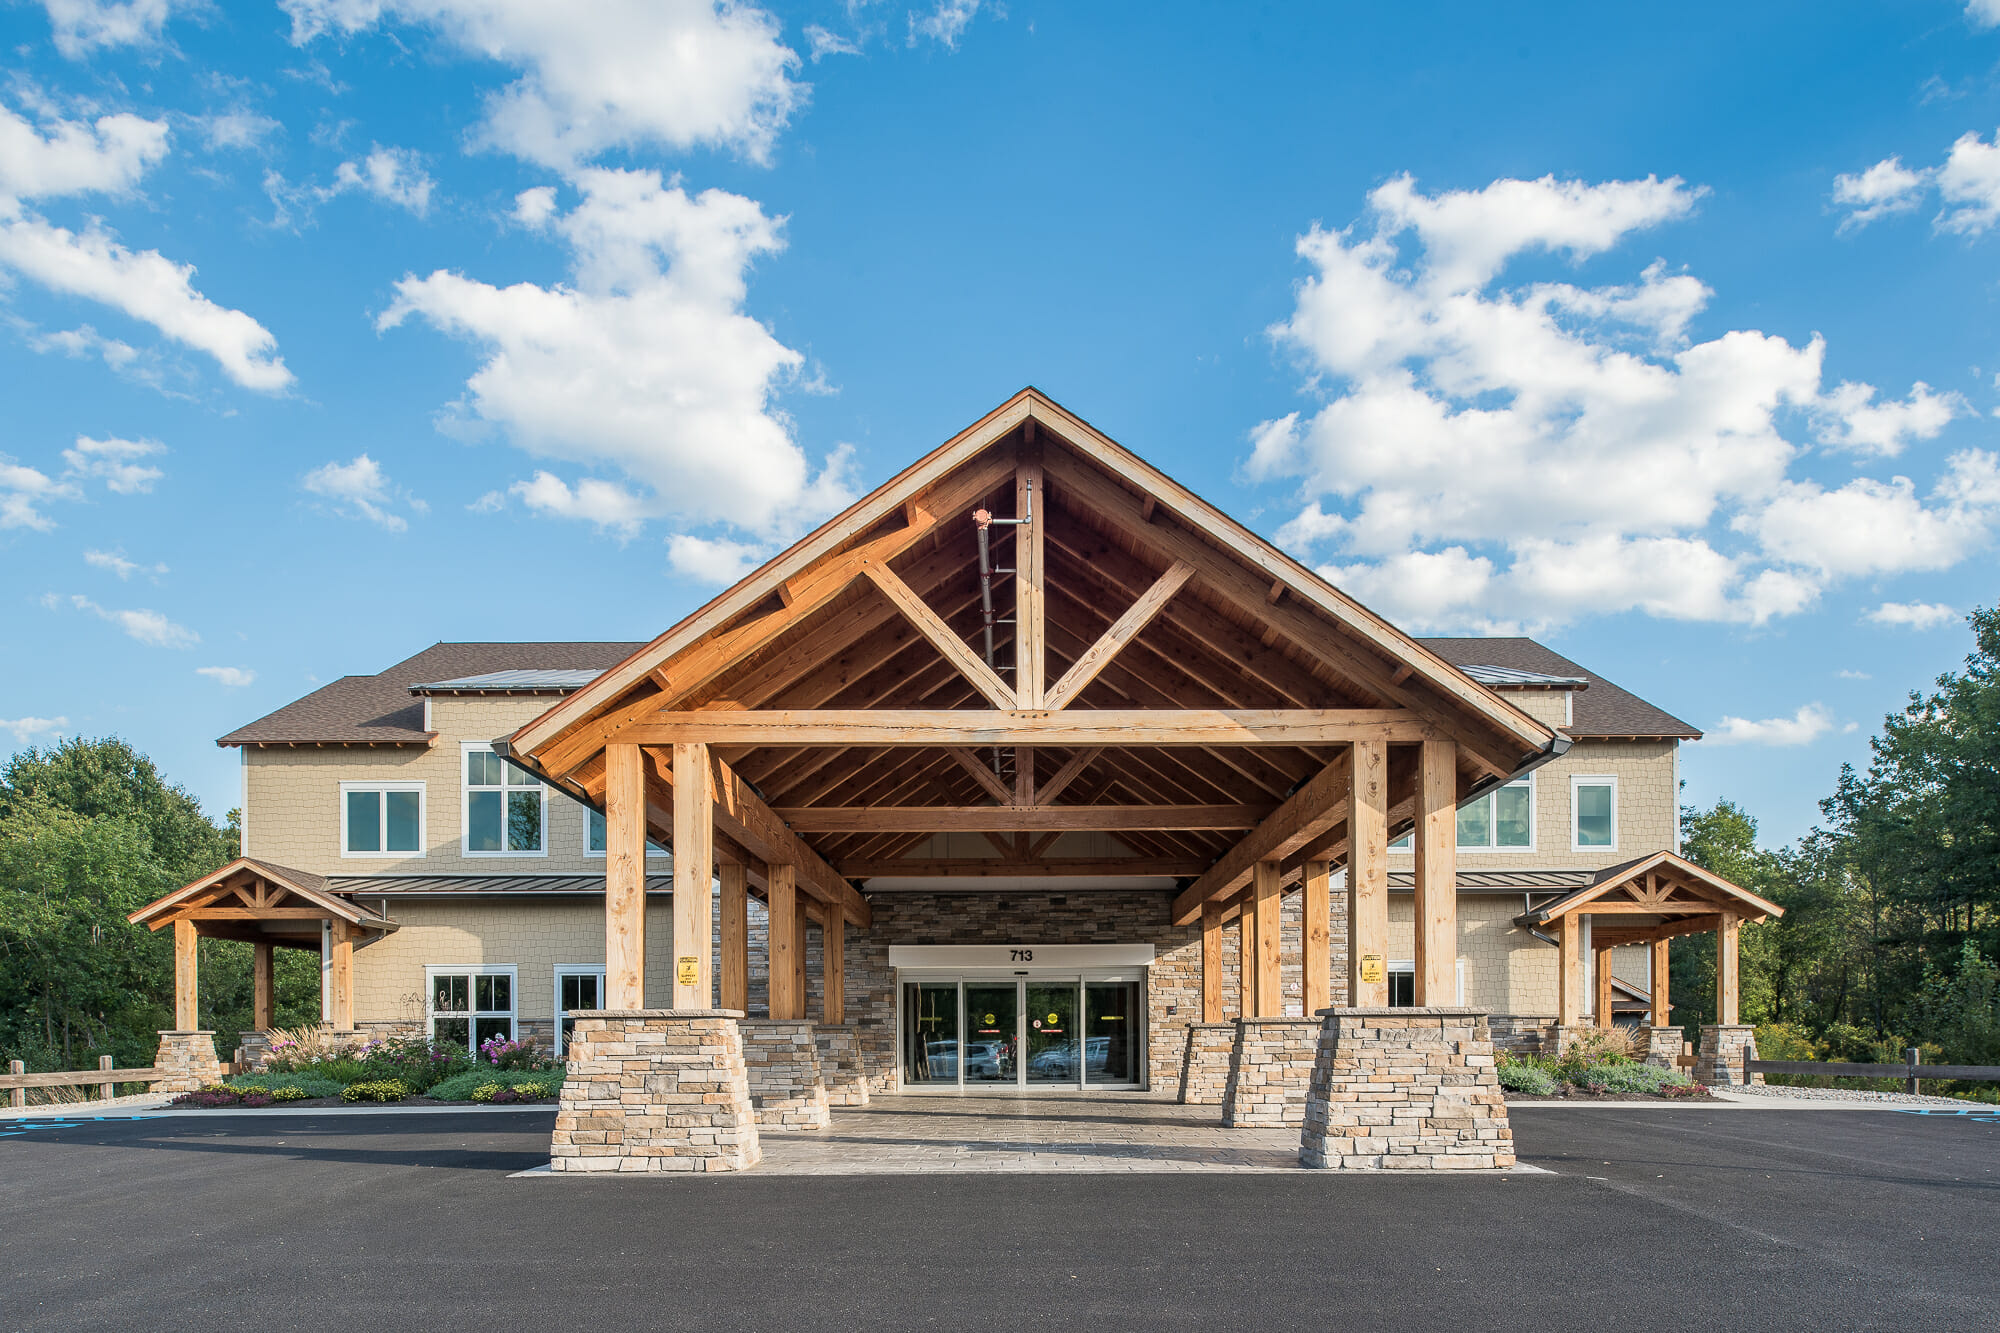 Heavy Timber Porte Cochere Entry Way with King Posts Outside of a Pediatric Dentist Office